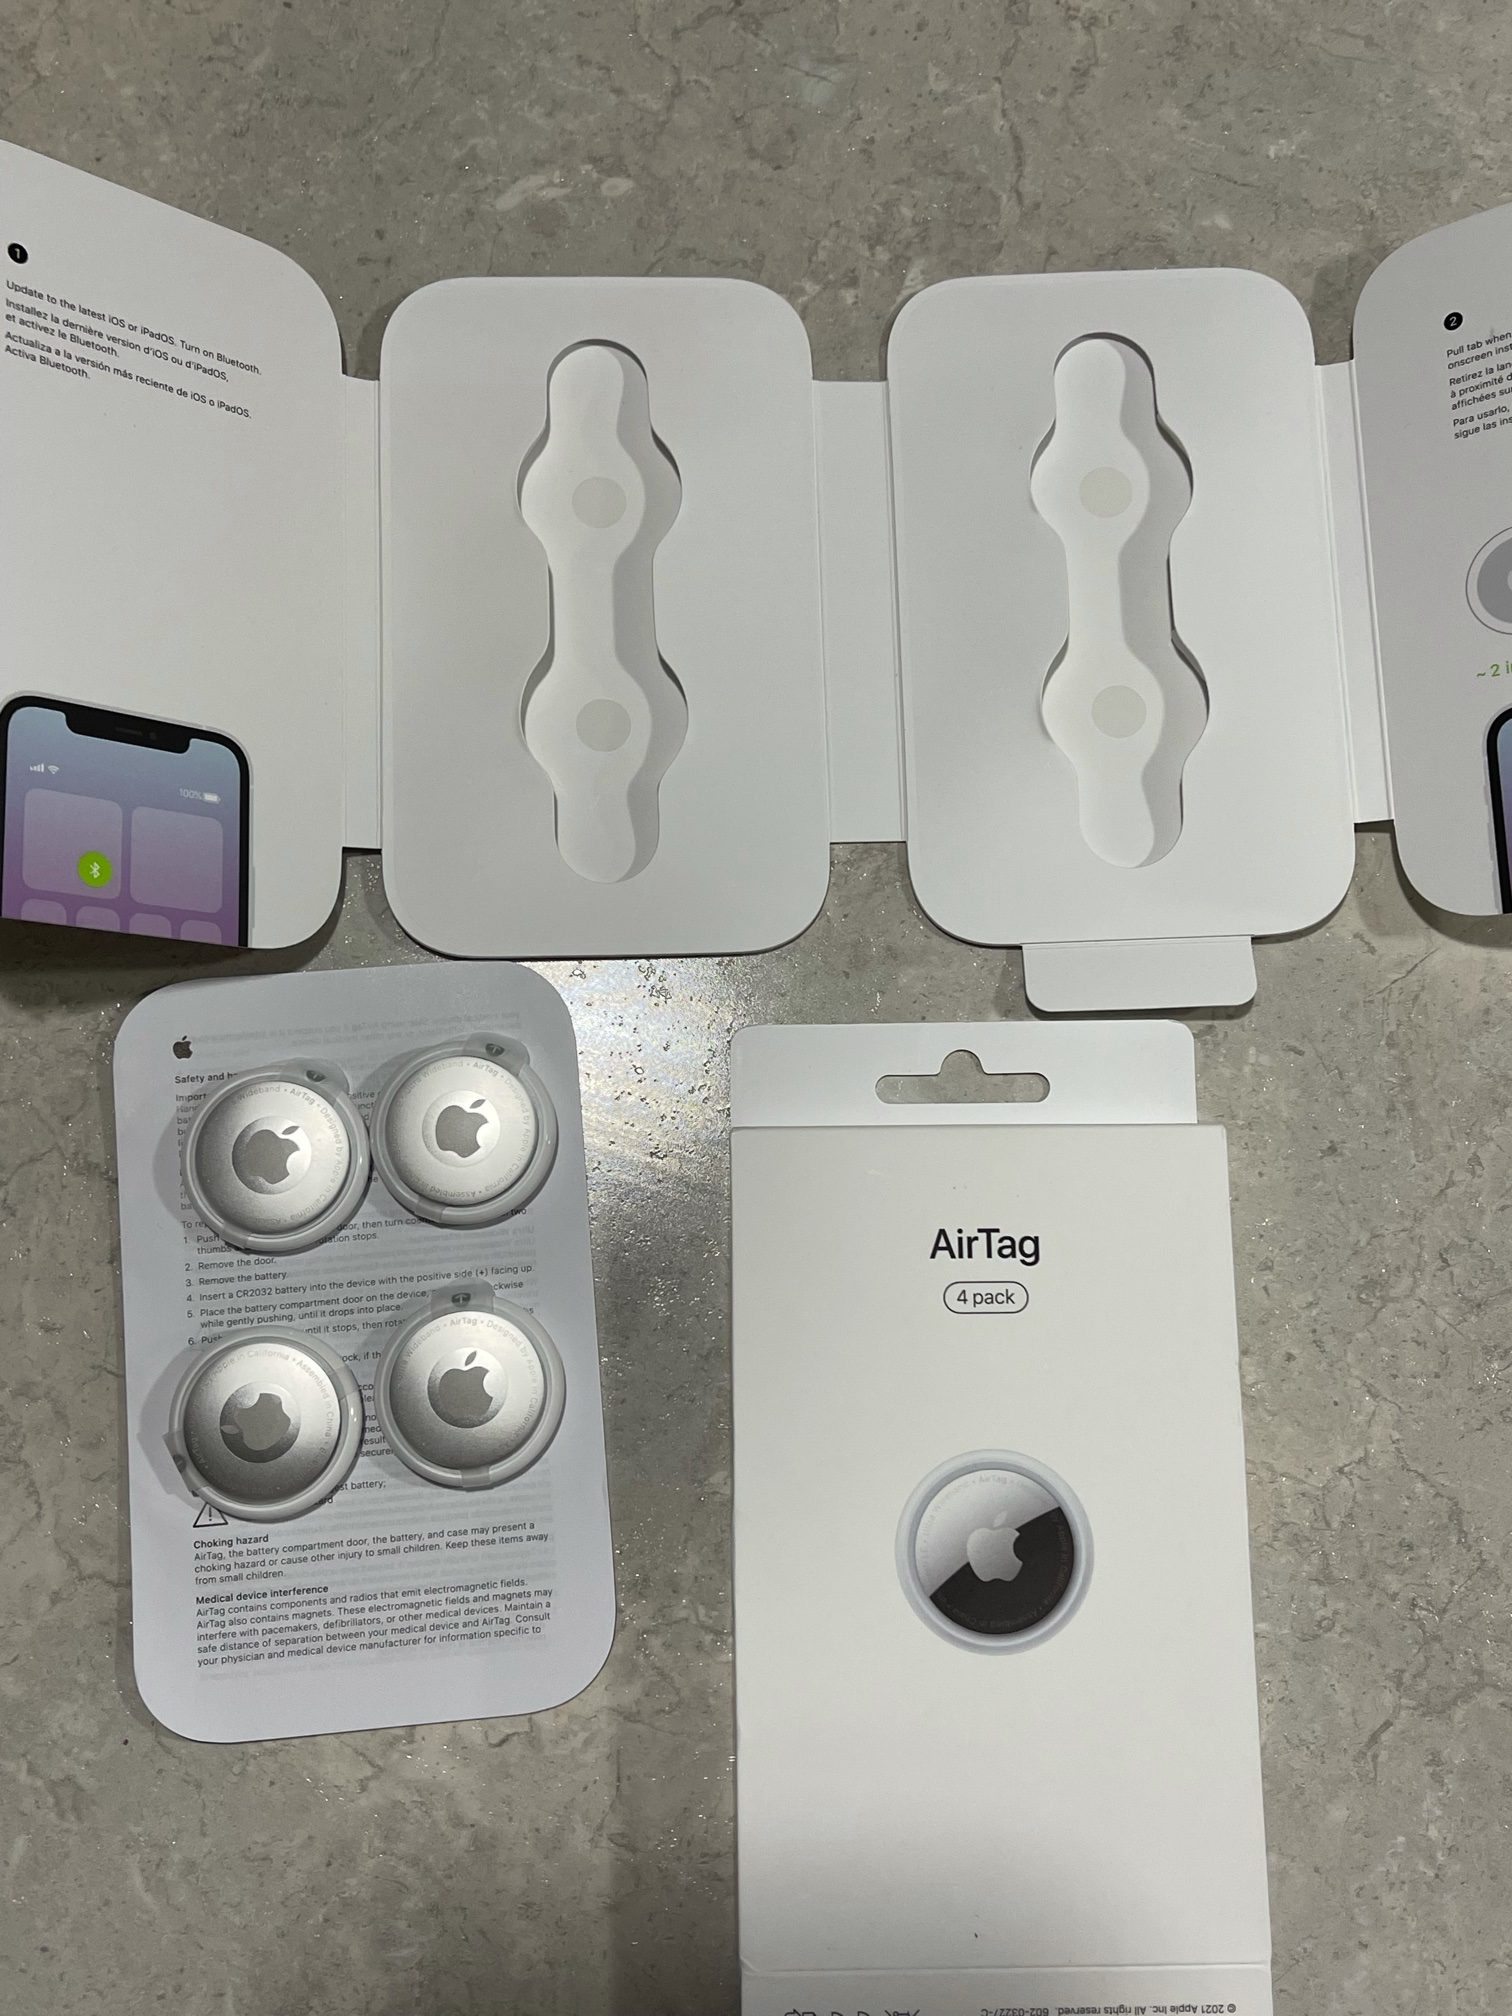 First AirTag shipment arrives early for lucky pre-order customer